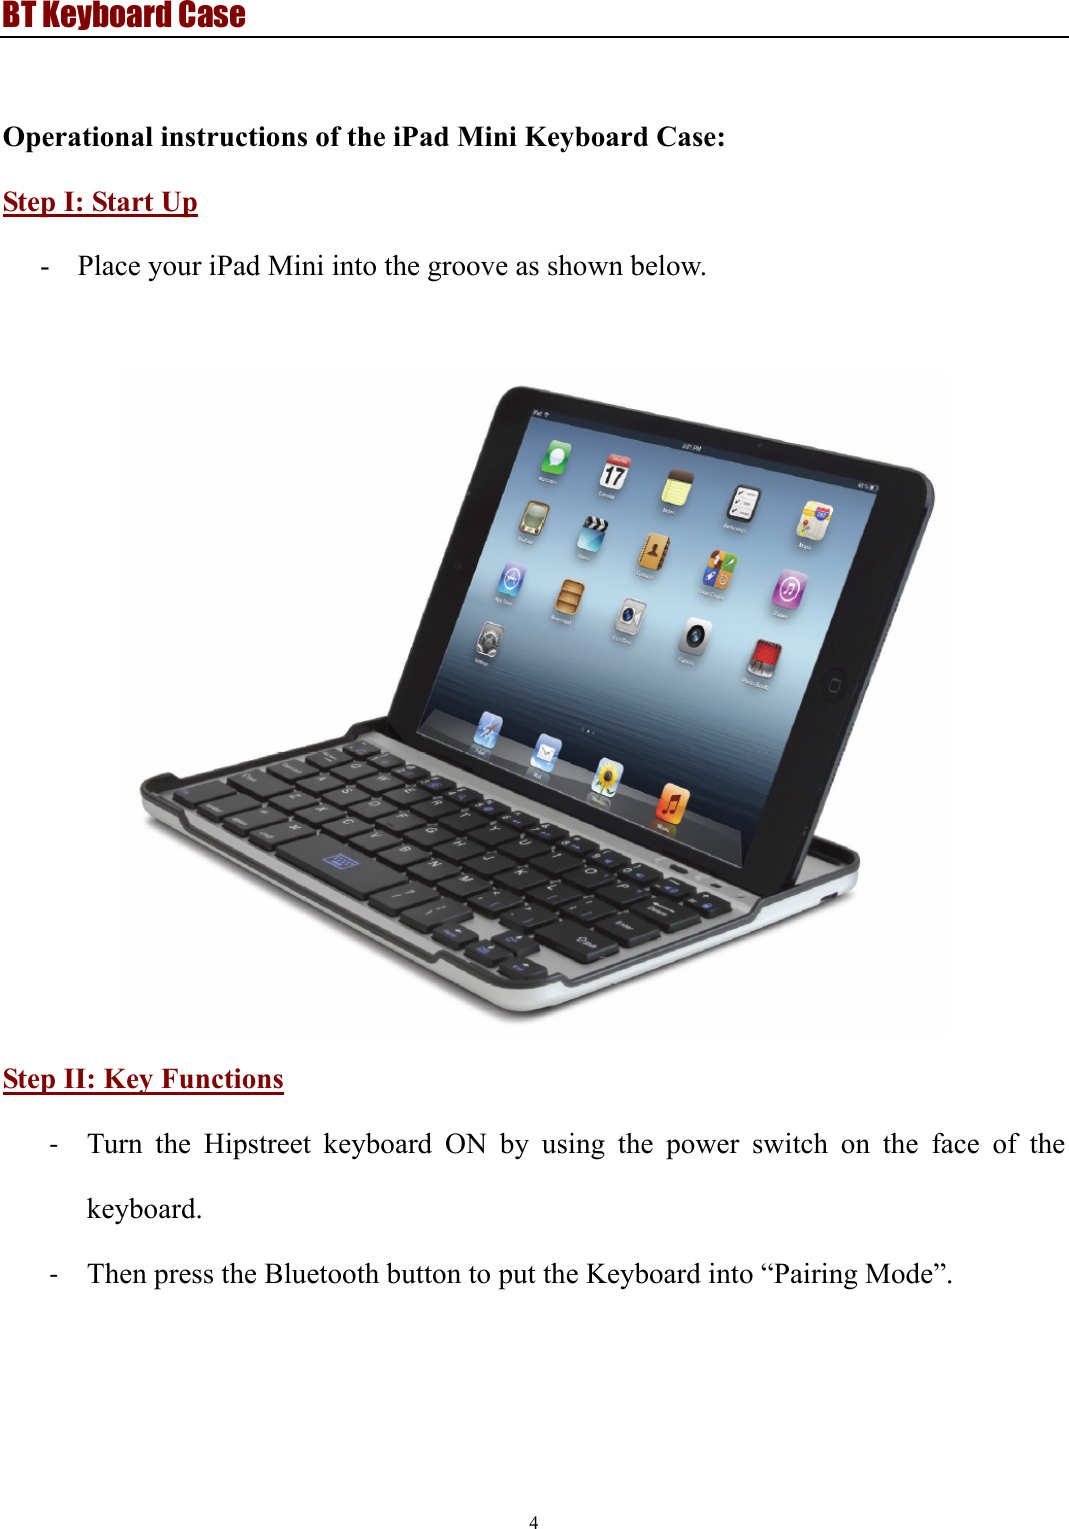 BT Keyboard Case 4   Operational instructions of the iPad Mini Keyboard Case: Step I: Start Up - Place your iPad Mini into the groove as shown below.       Step II: Key Functions ‐ Turn the Hipstreet keyboard ON by using the power switch on the face of the keyboard. ‐ Then press the Bluetooth button to put the Keyboard into “Pairing Mode”.   